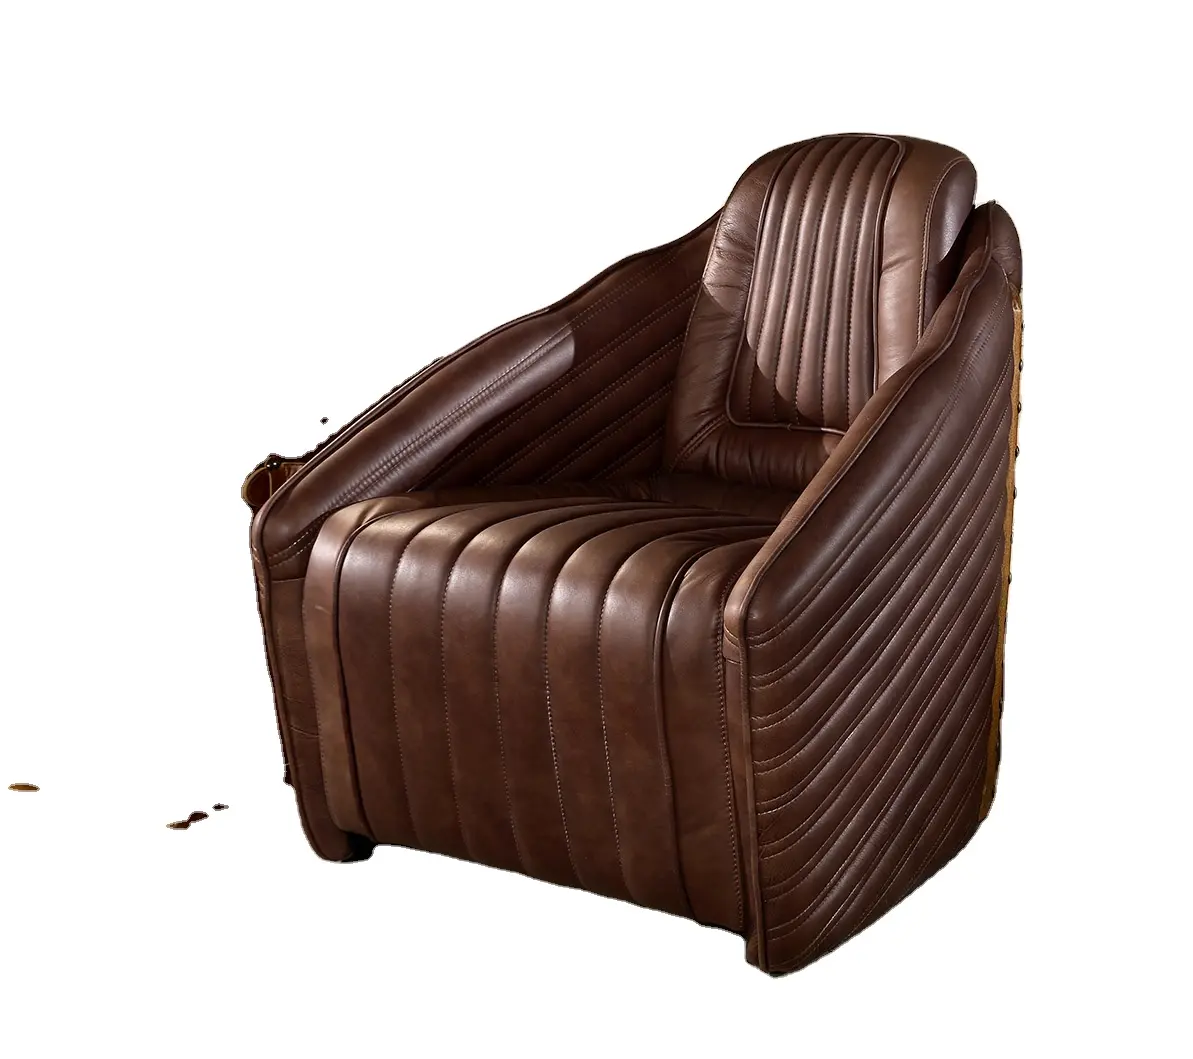 antique Cigar lounge furniture leather chair and living room chairs leather for vintage club